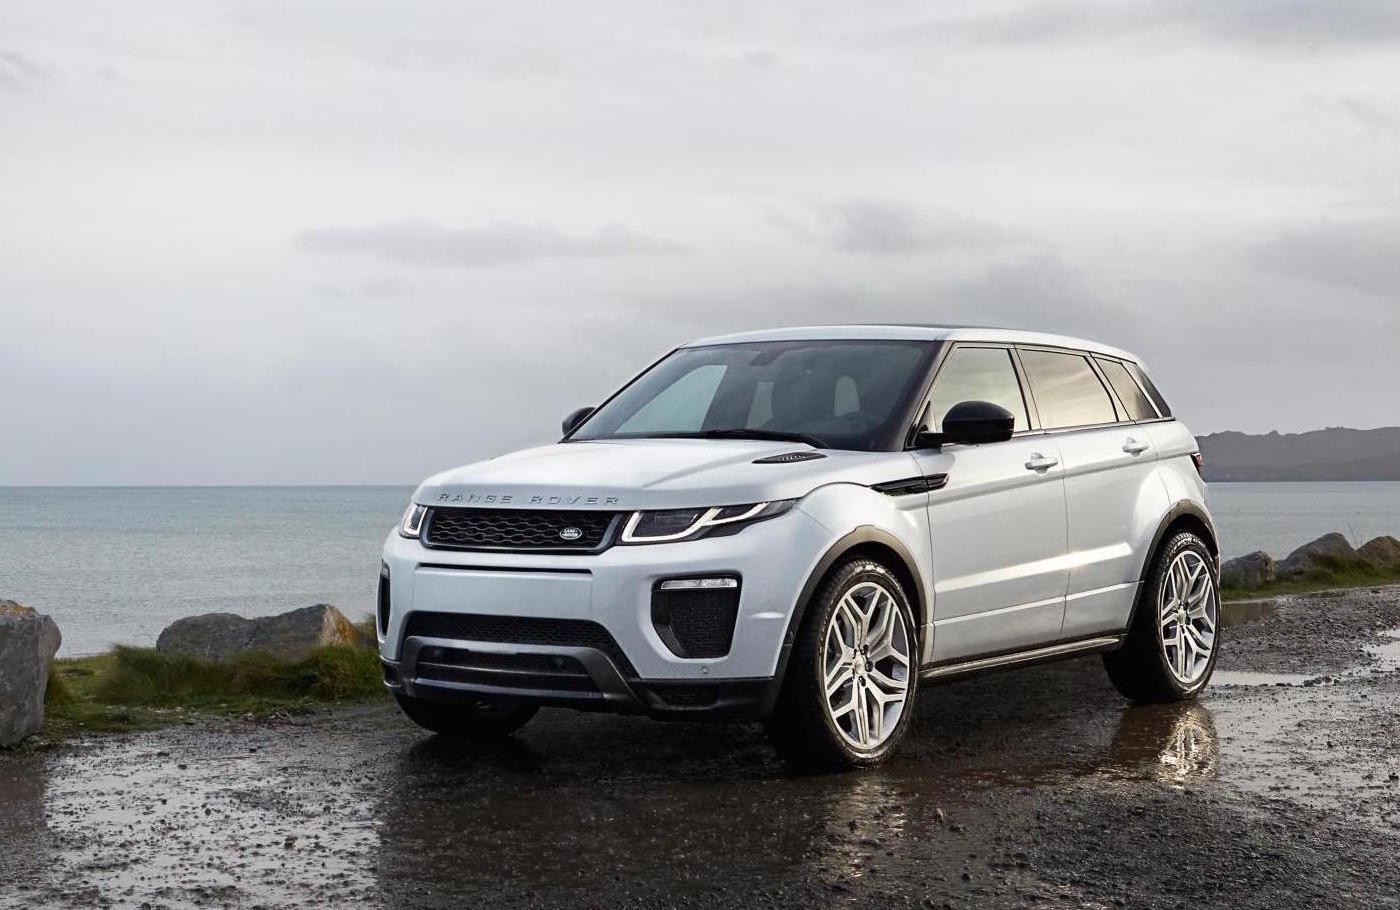 White Range Rover Evoque parked overlooking a lake view.